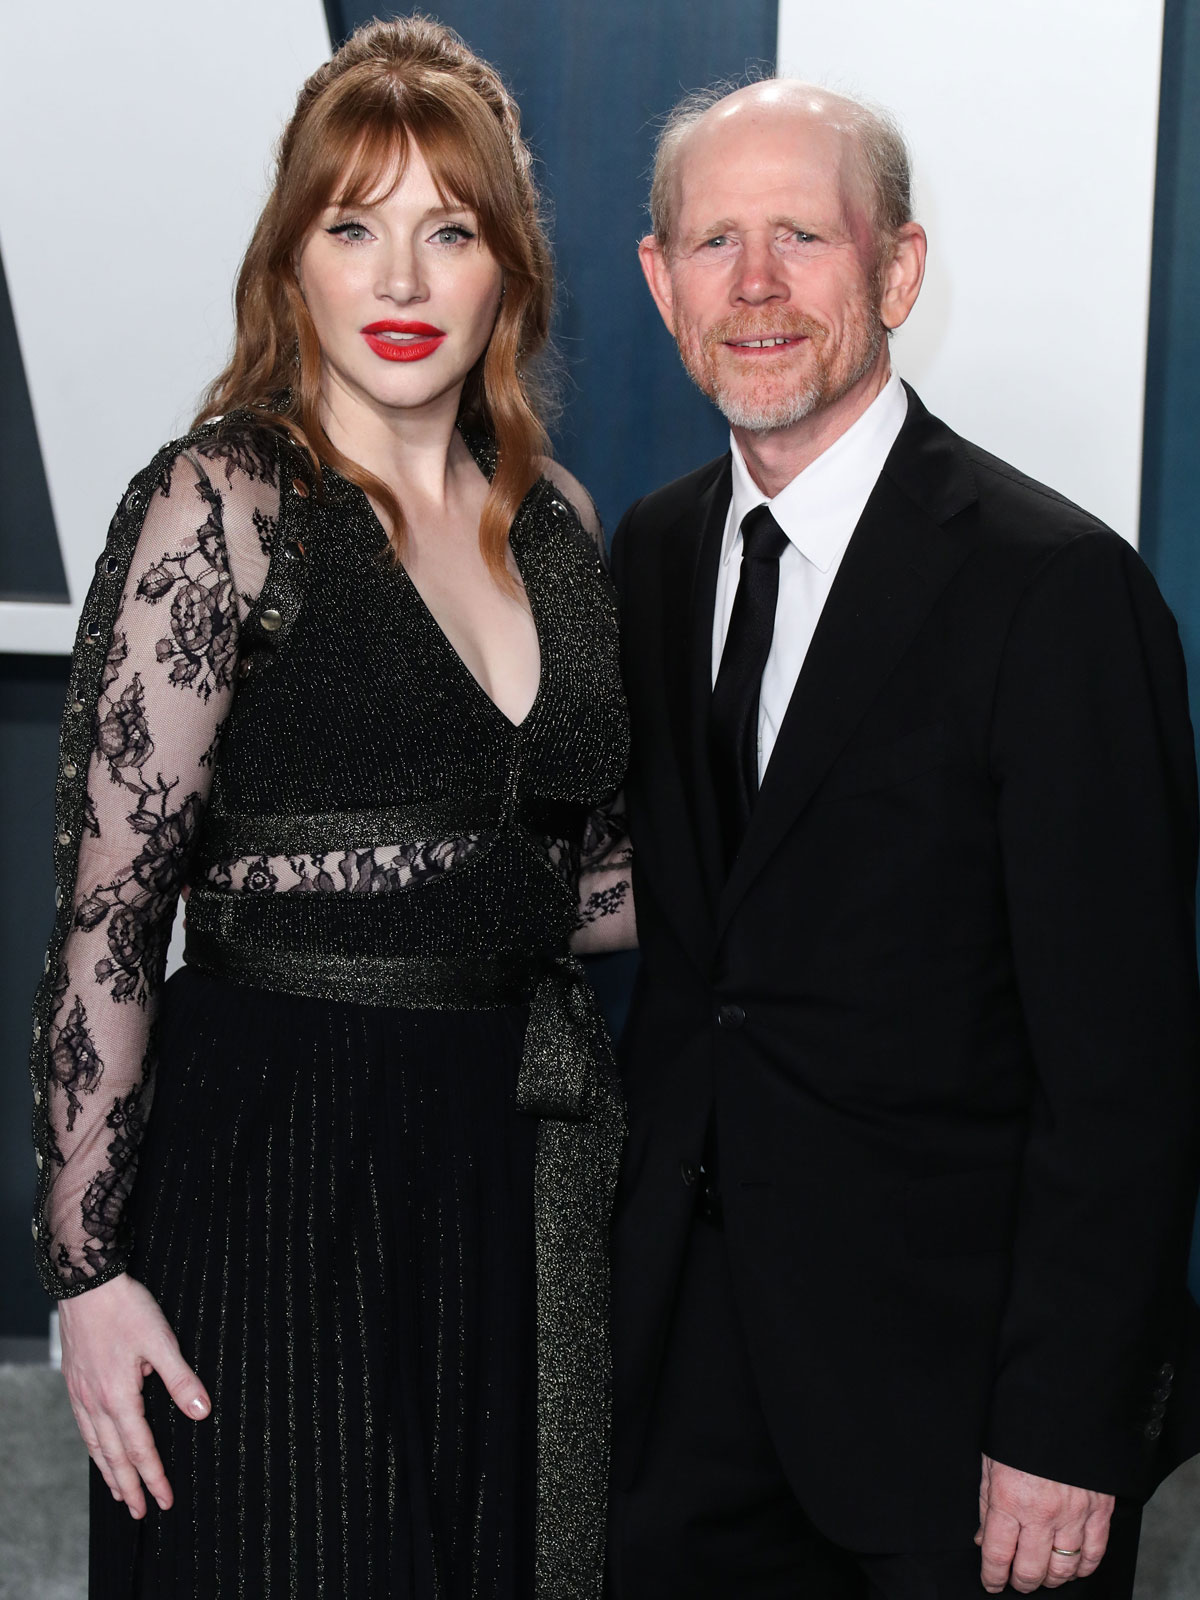 Ron Howard and Bryce Dallas Howard are related